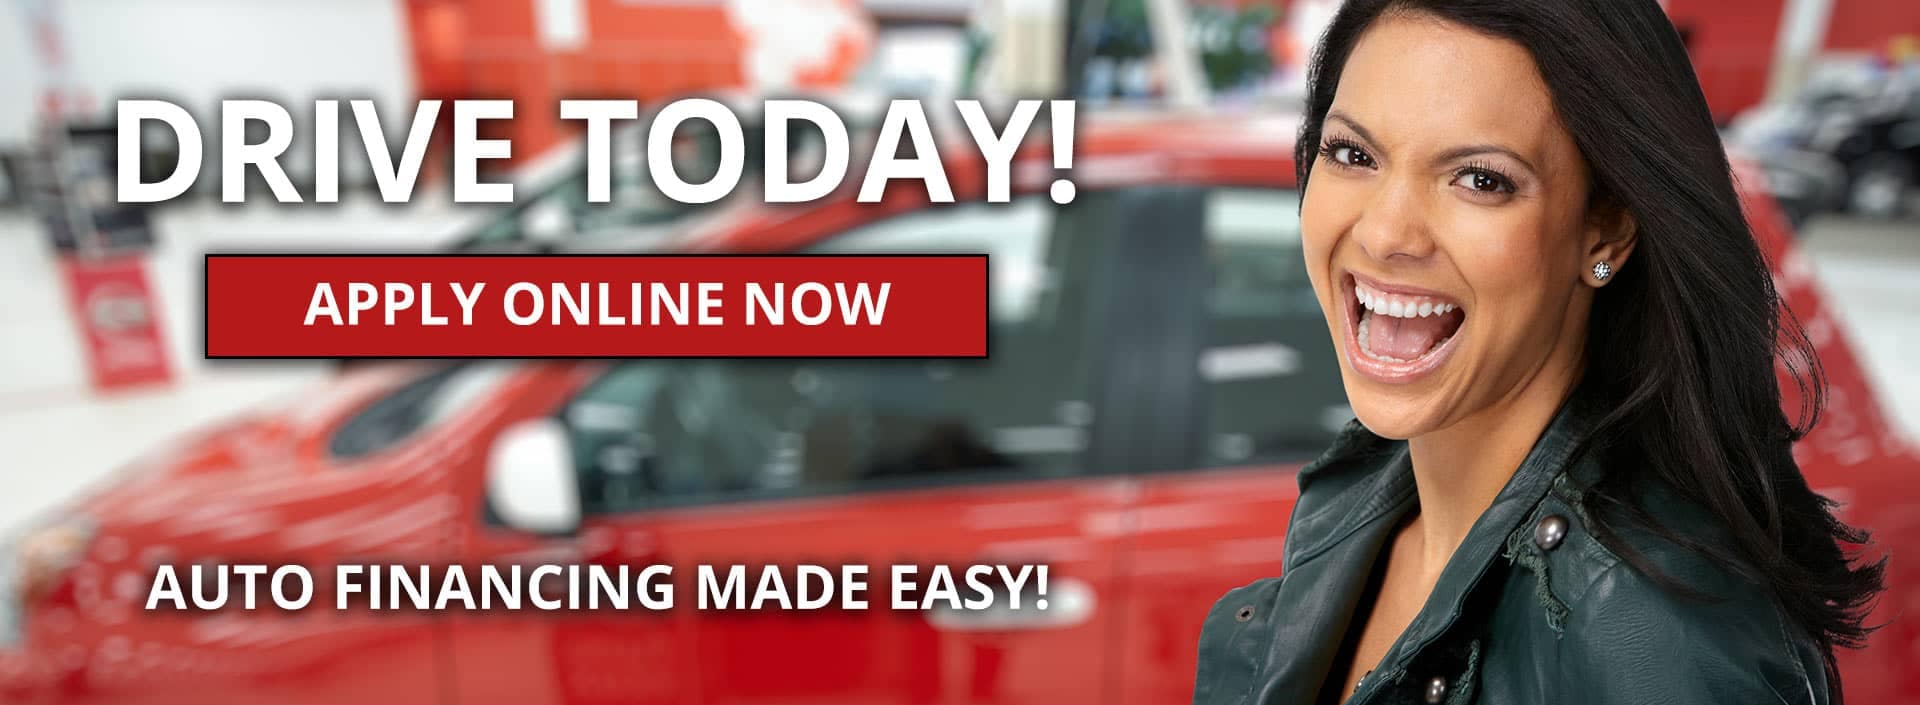 Auto Financing - Apply Online Now